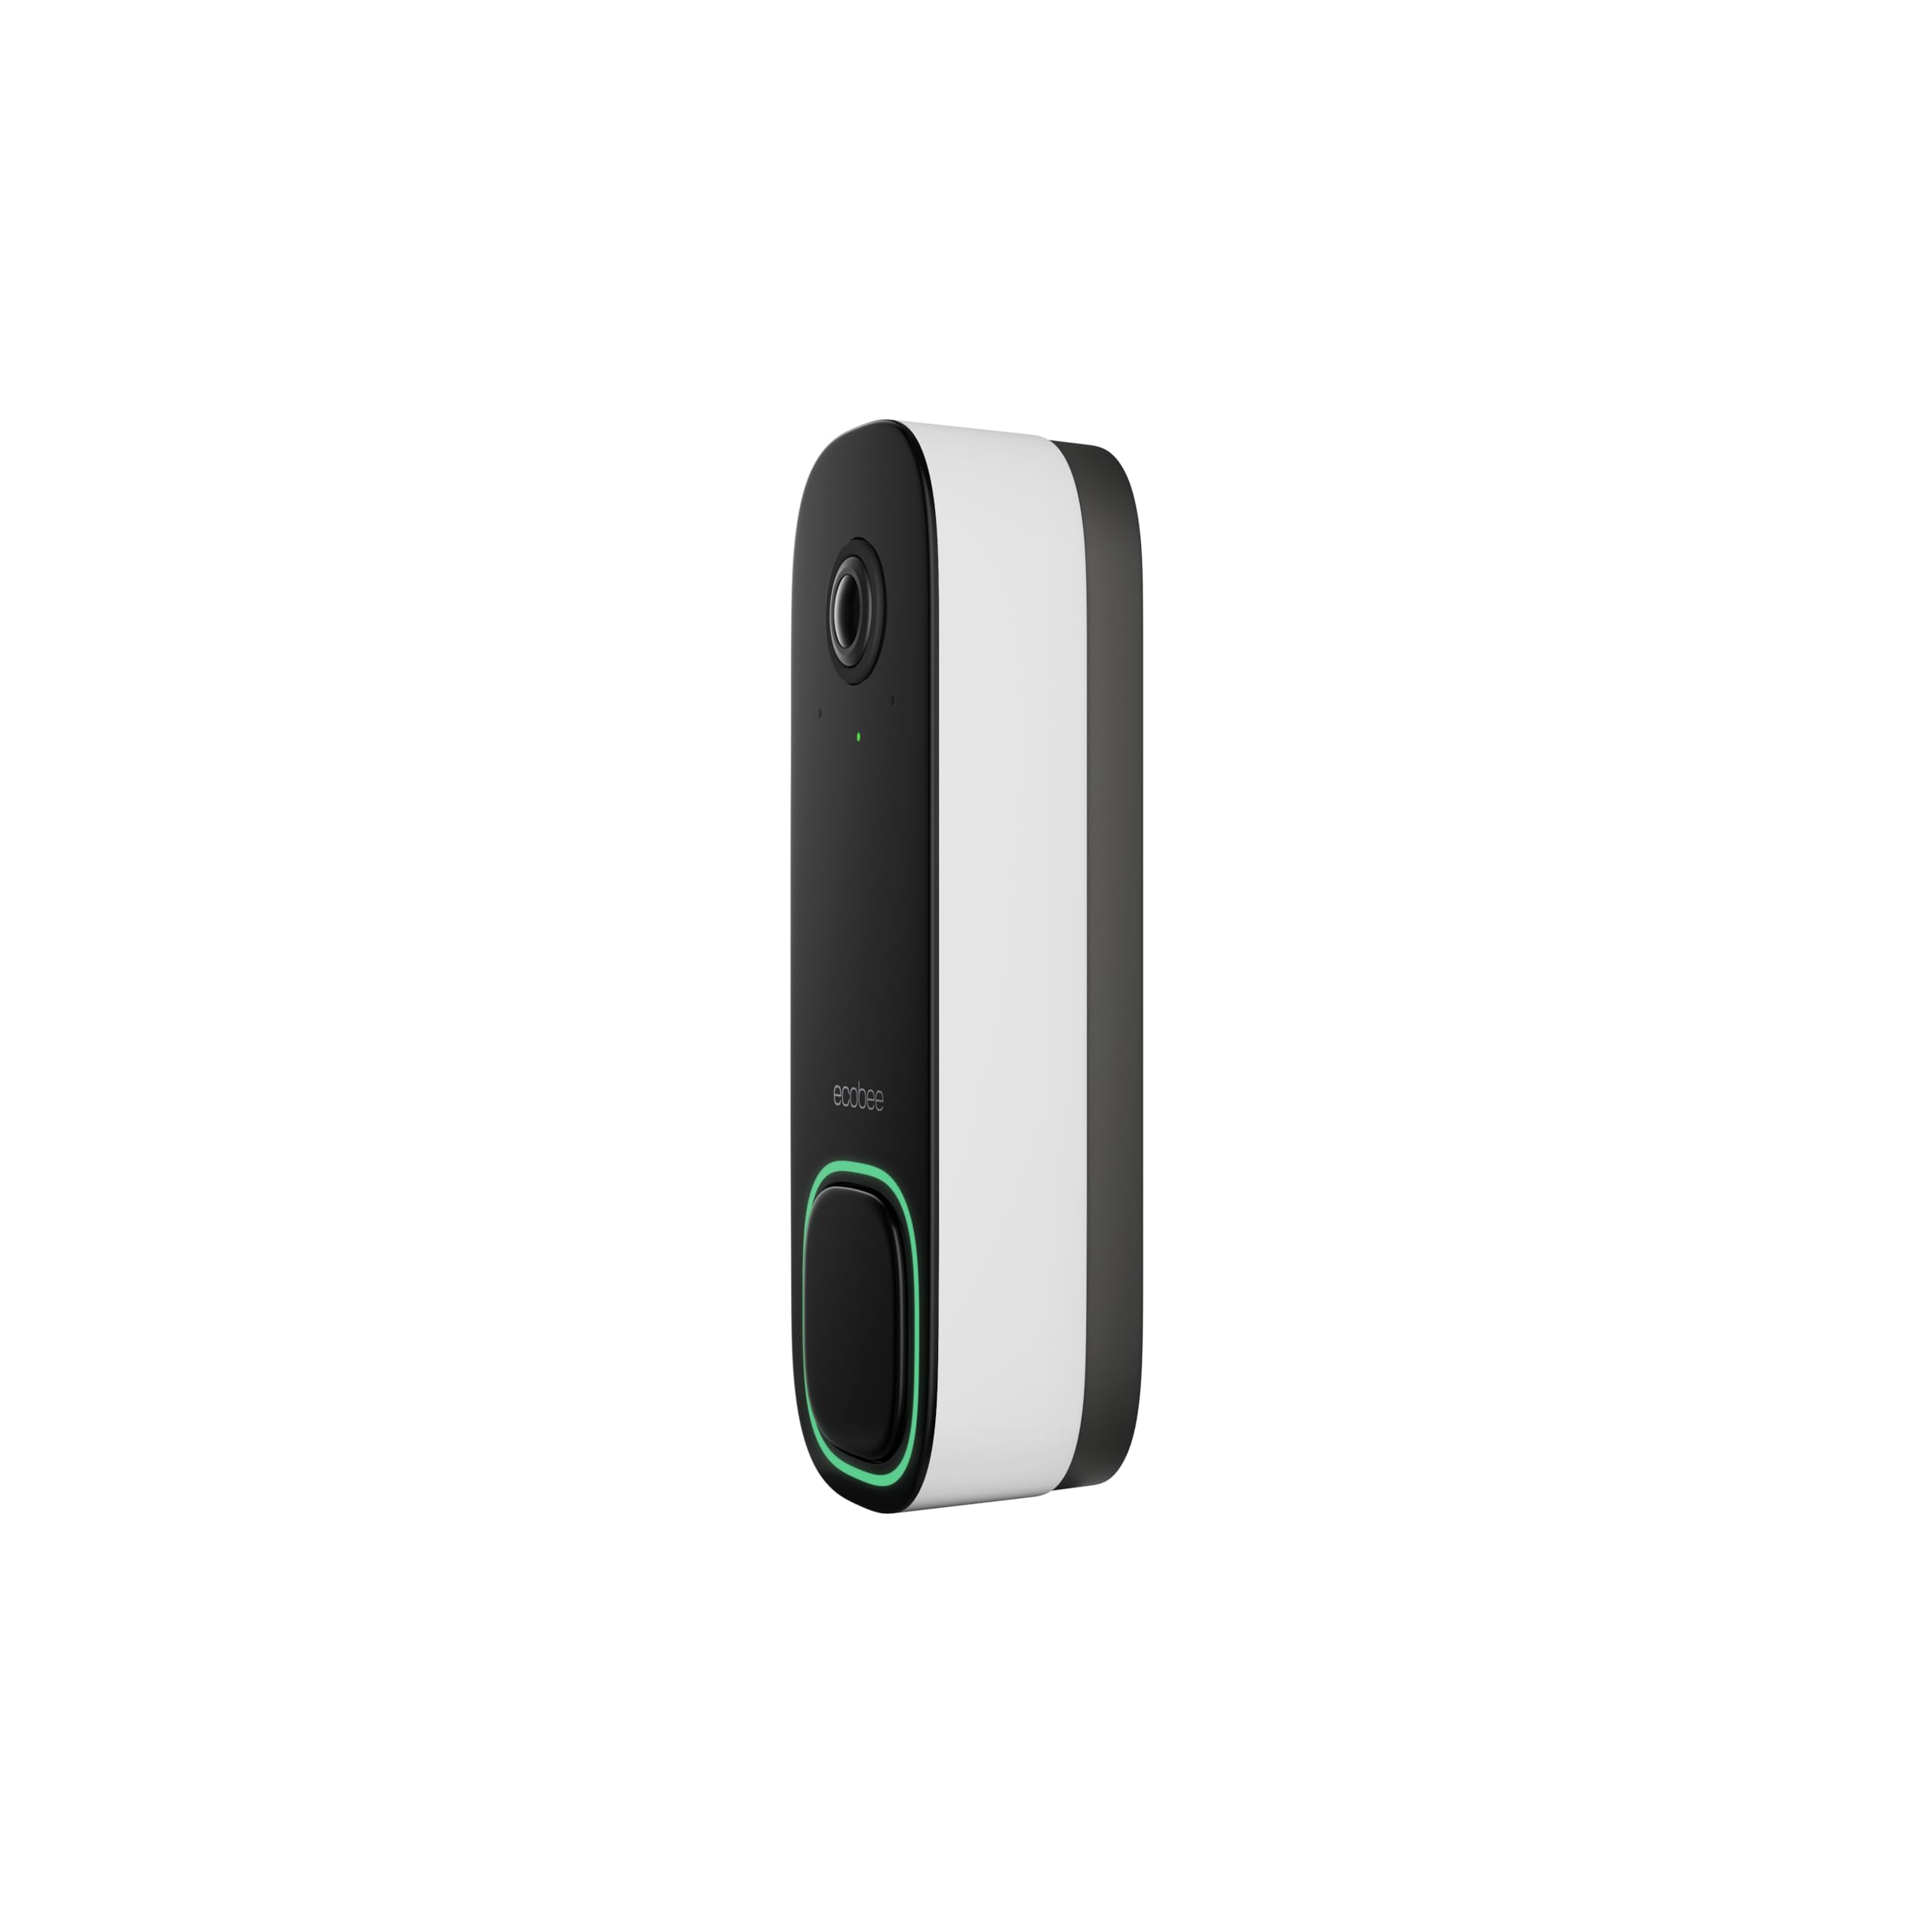 ecobee New Smart Video Doorbell Camera (Wired) - with Industry Leading HD Camera, Smart Security, Night Vision, Person and Package Sensors, 2-Way Talk, and Video & Snapshot Recording